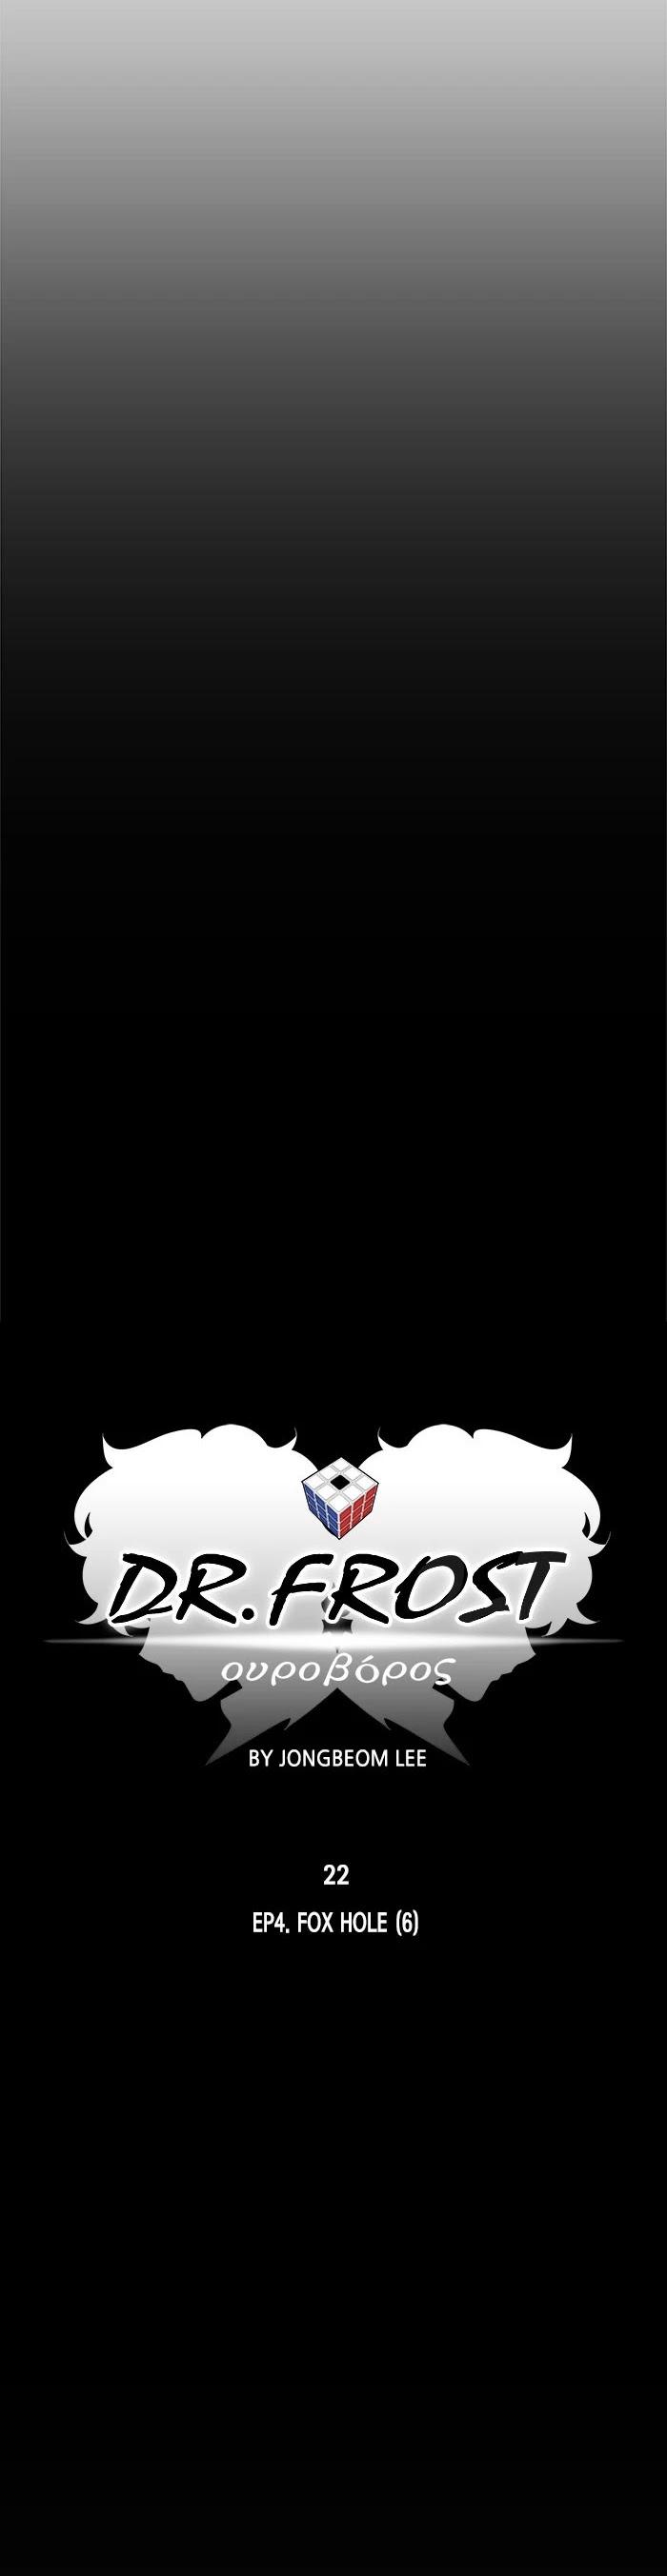 Dr Frost - episode 185 - 14